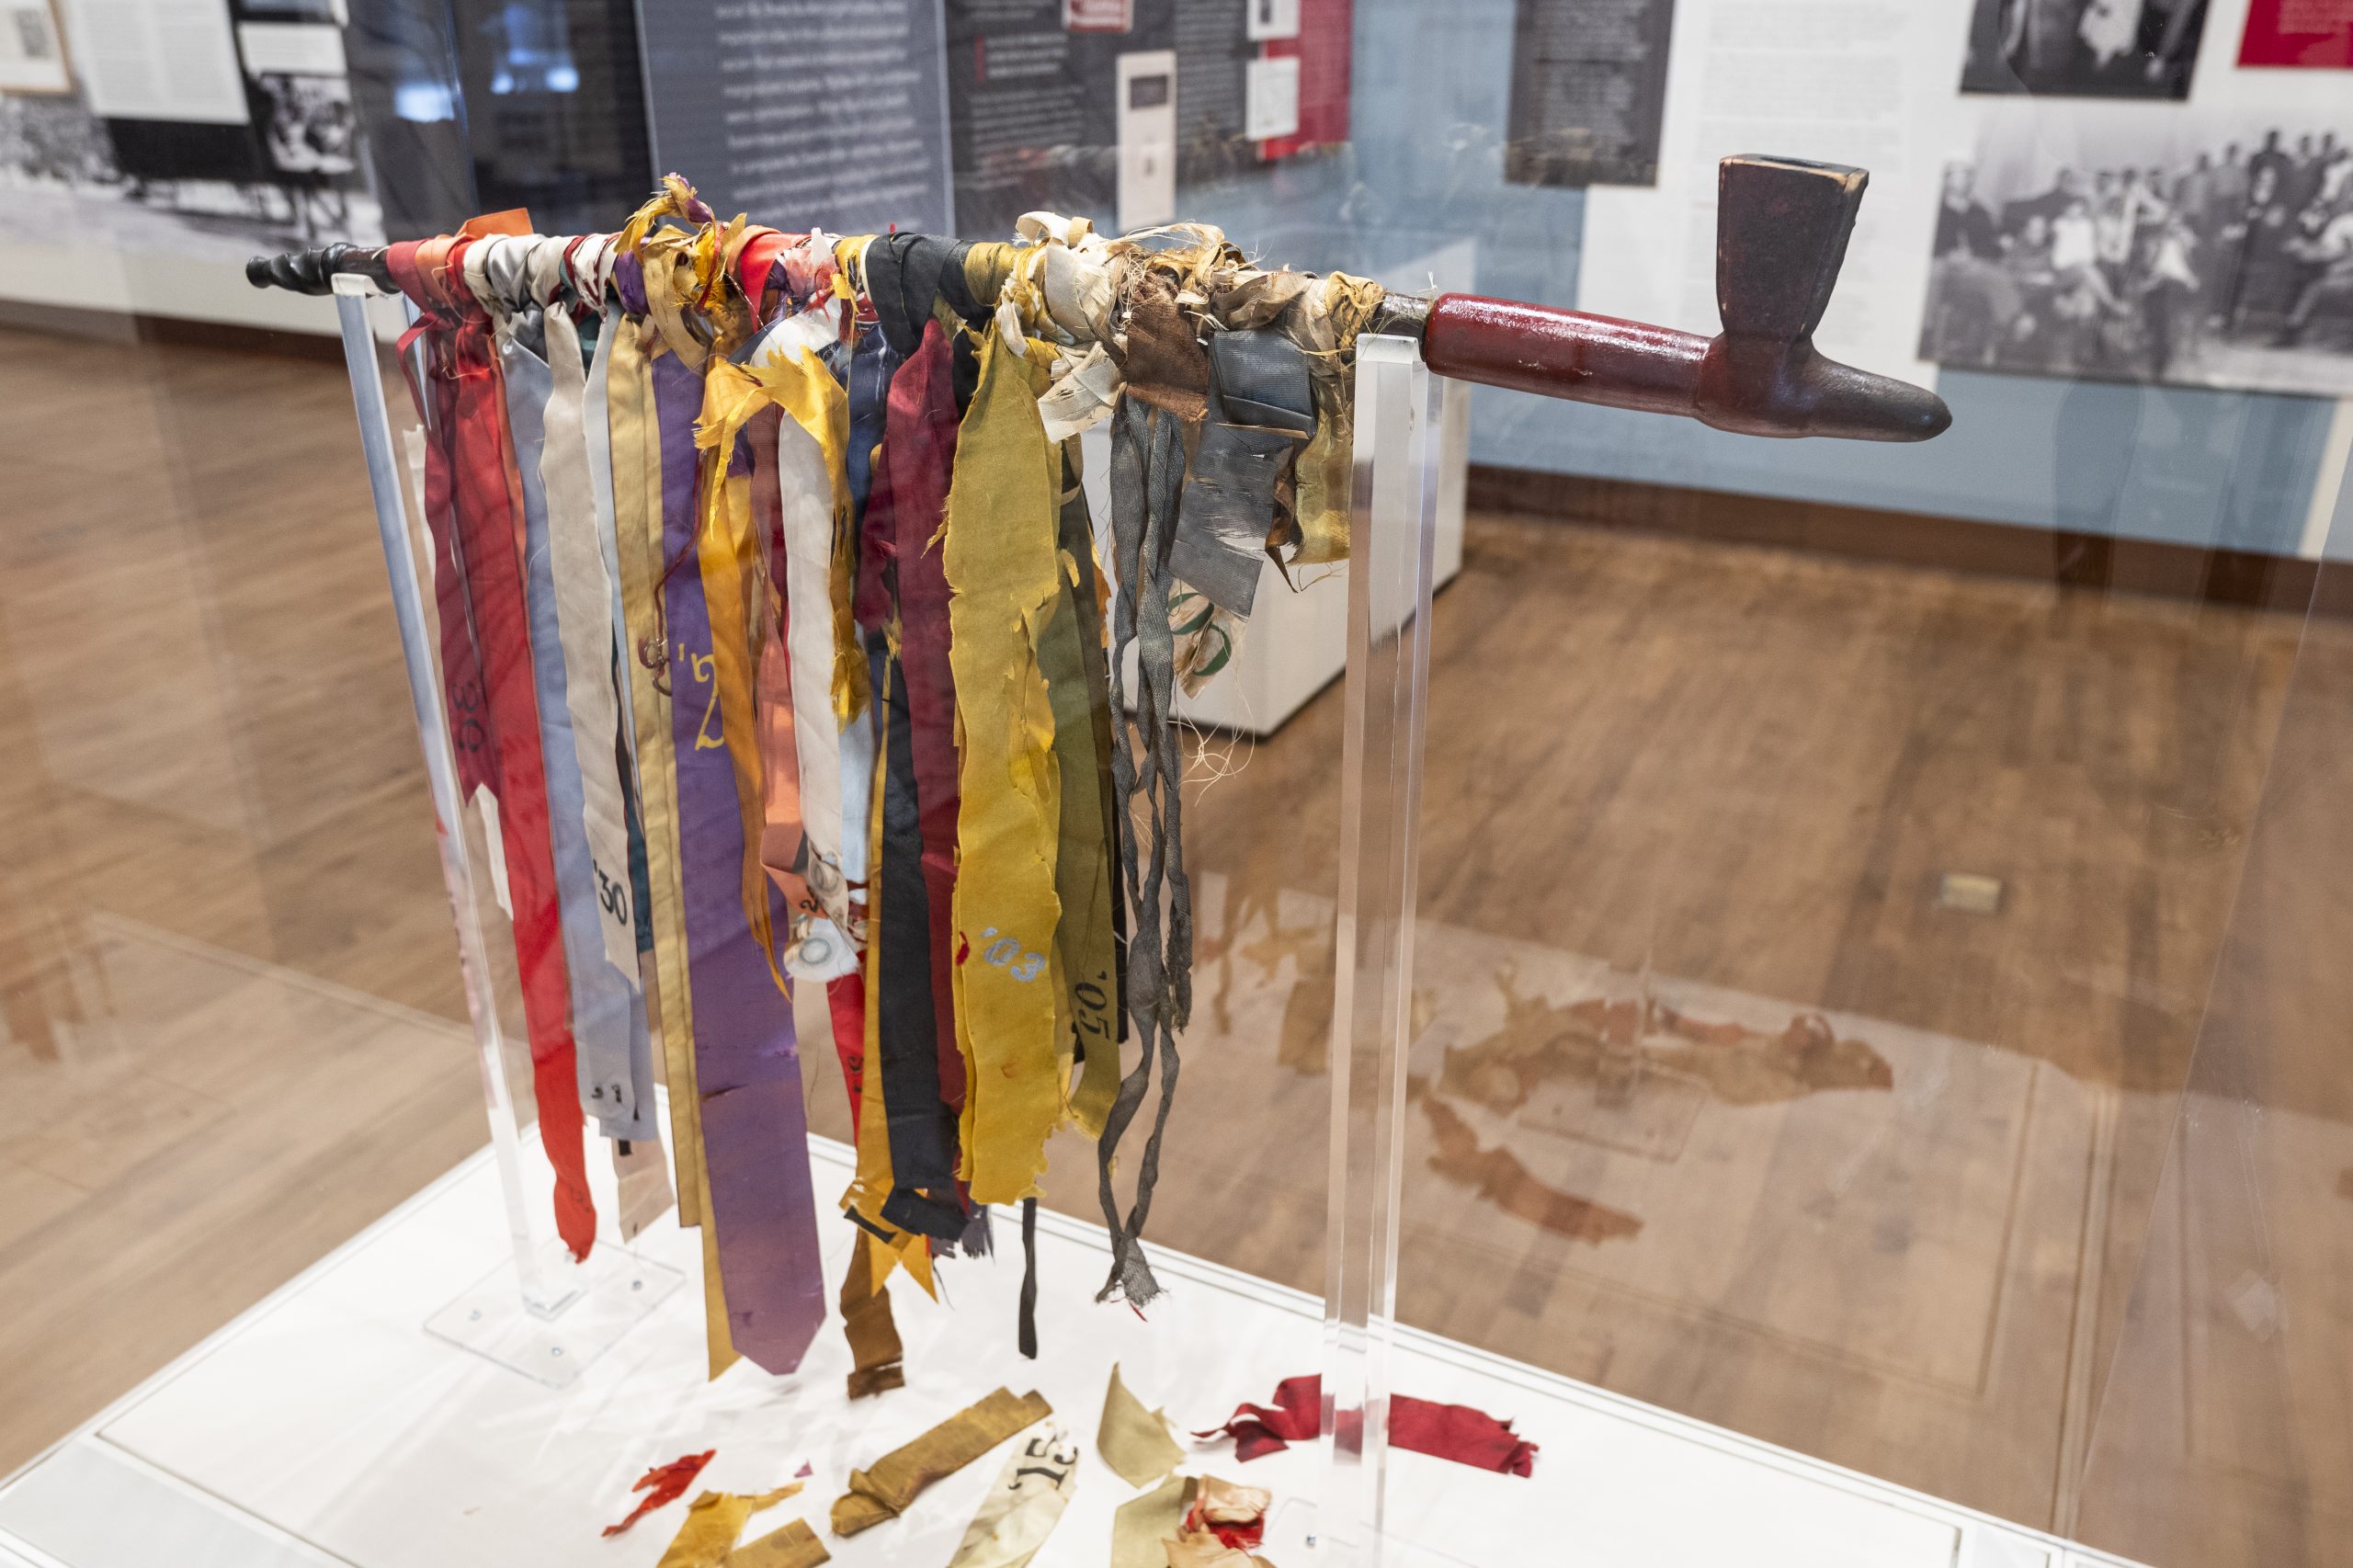 Photo of the pipe of peace, a ceremonial object used by white students in a popular mock Native ceremony in the early 20th century. It is a carved wooden pipe about two feet long around which have been tied ribbons of different colors representing different class years.